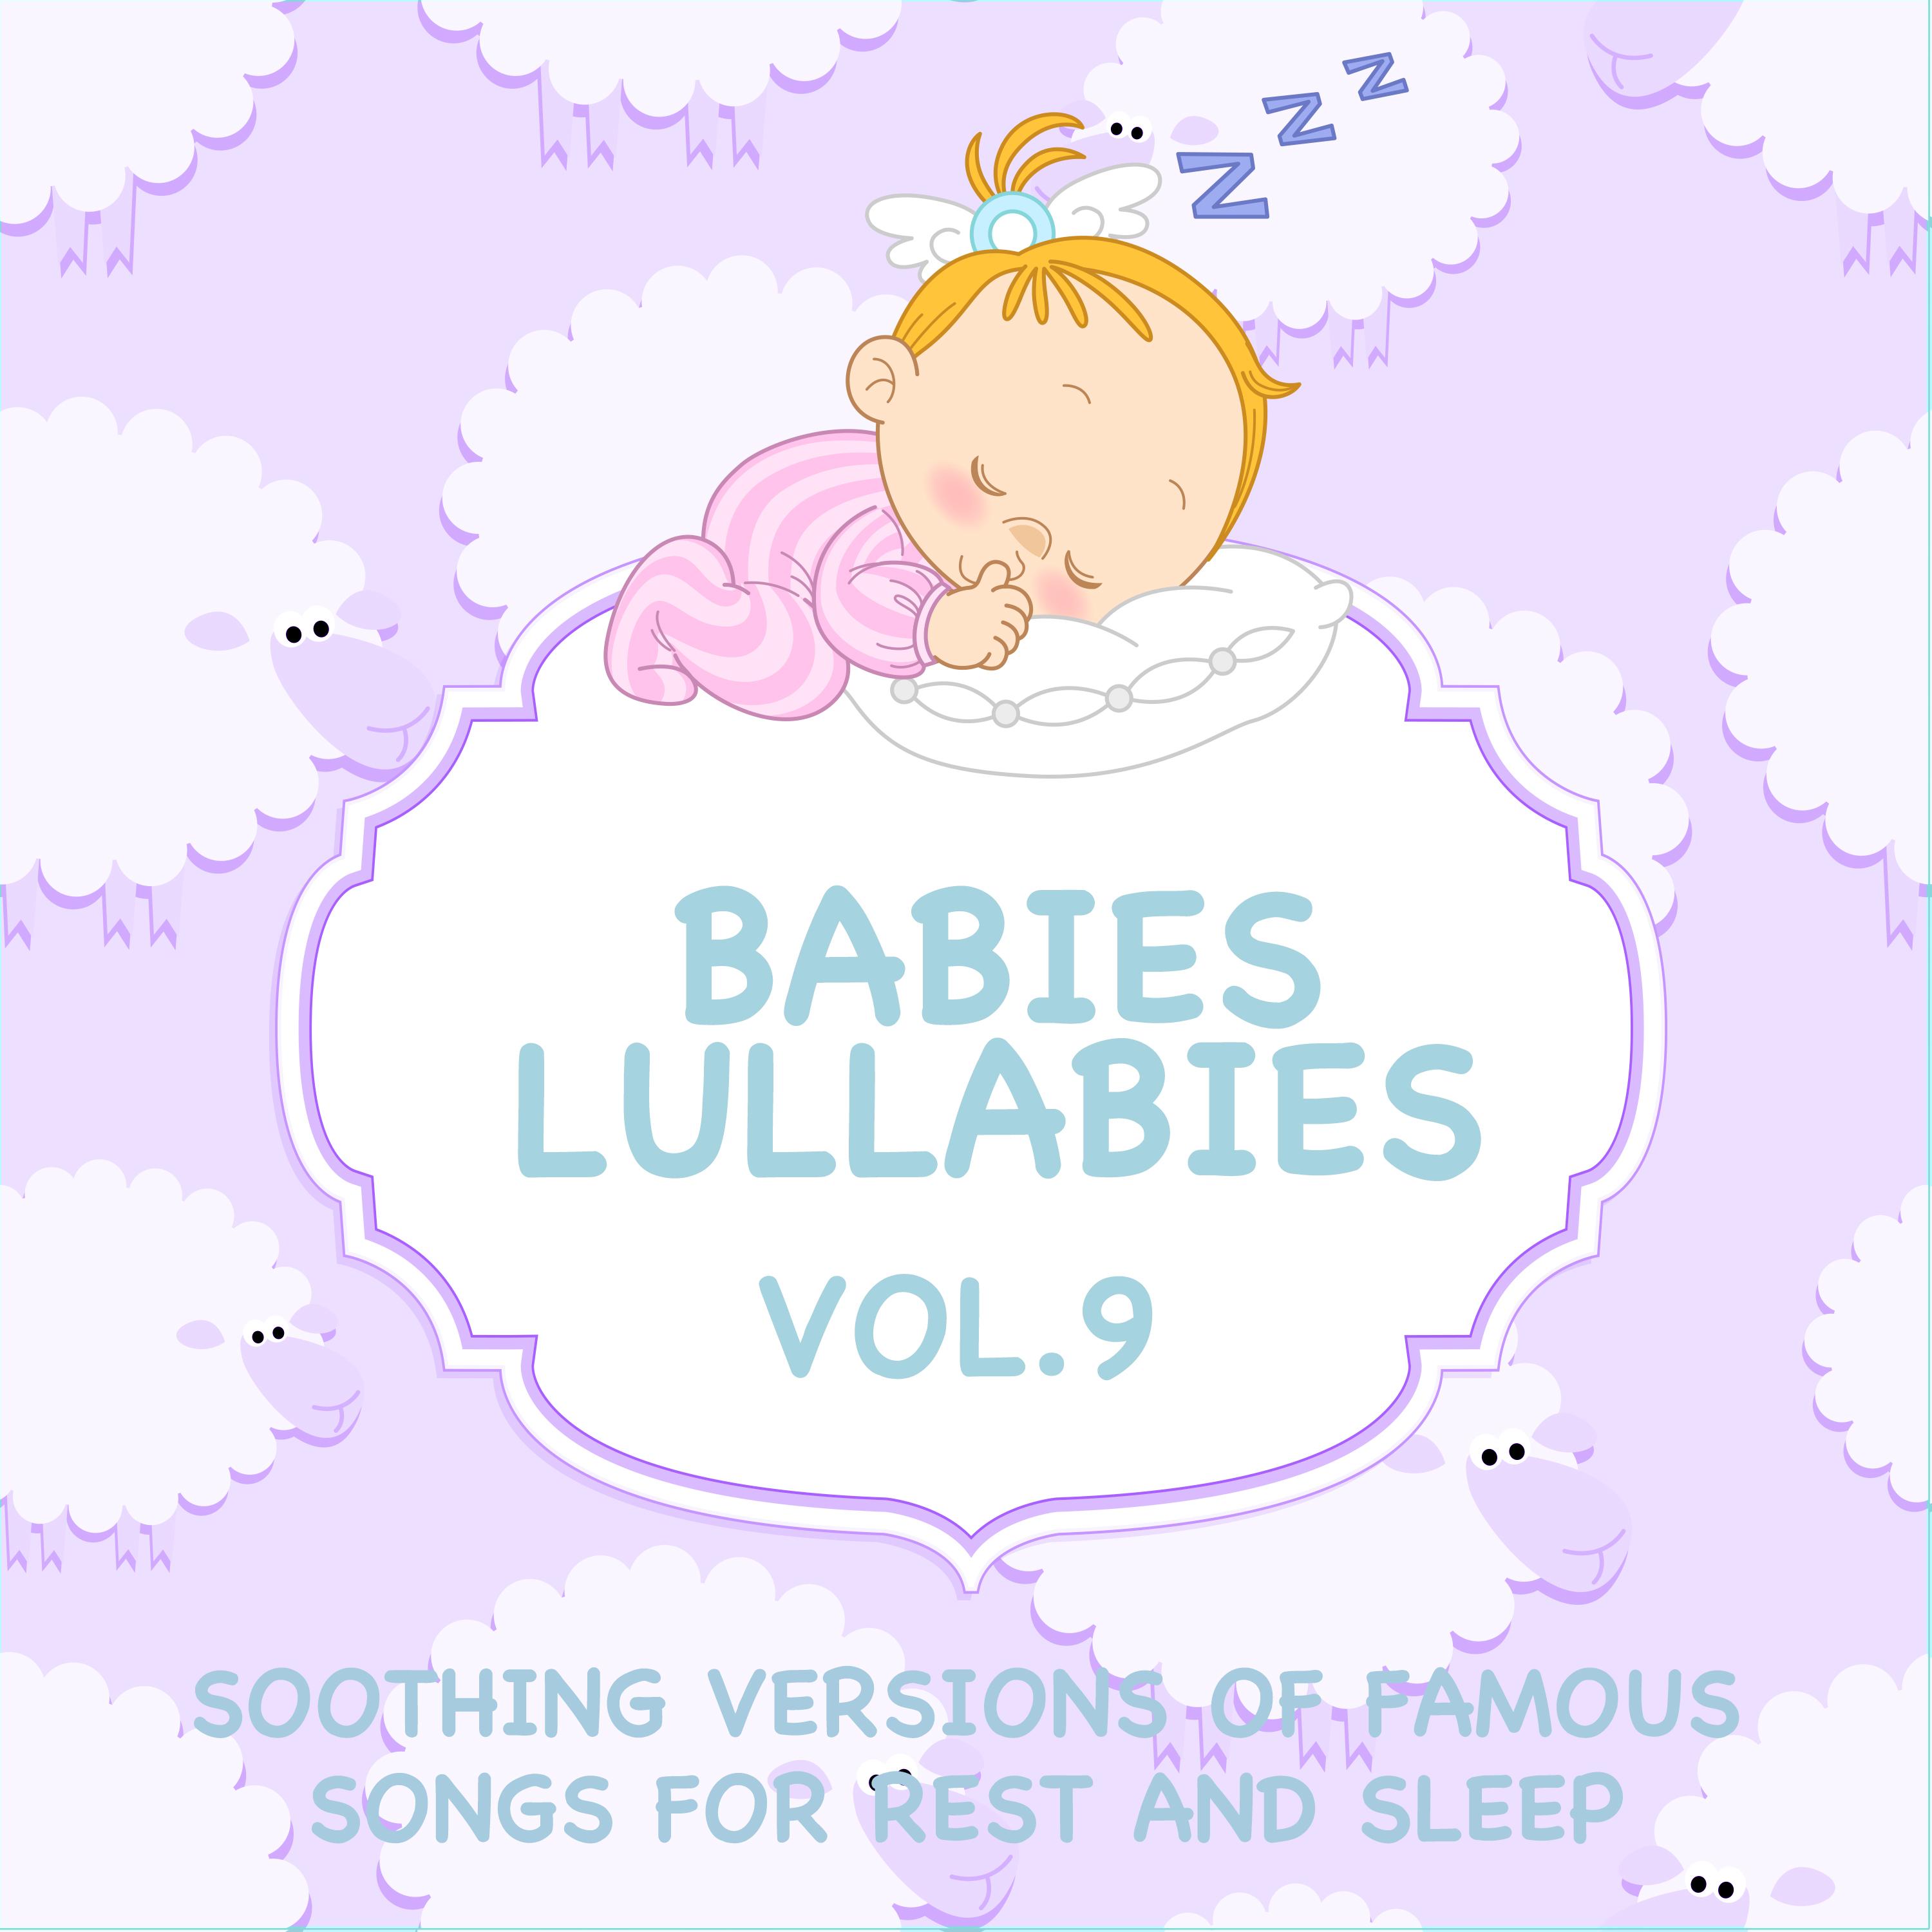 Babies Lullabies - Soothing Versions of Famous Songs for Rest and Sleep, Vol. 9